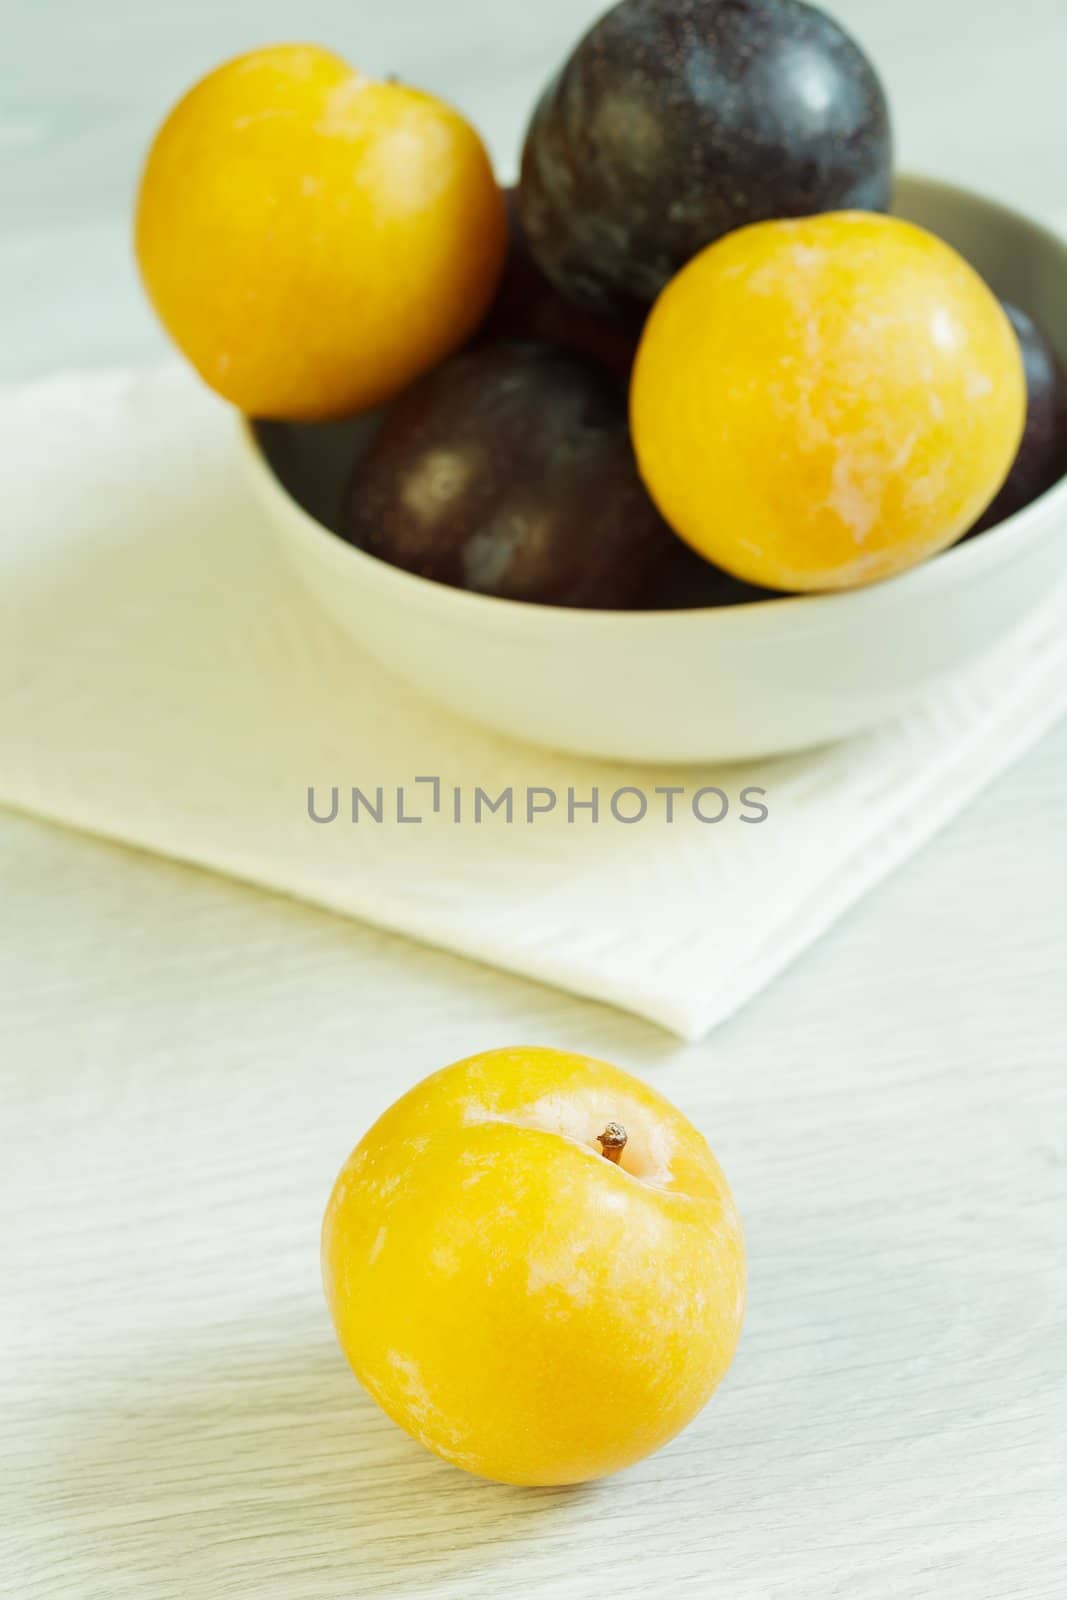 Mirabelle and other plums on the table